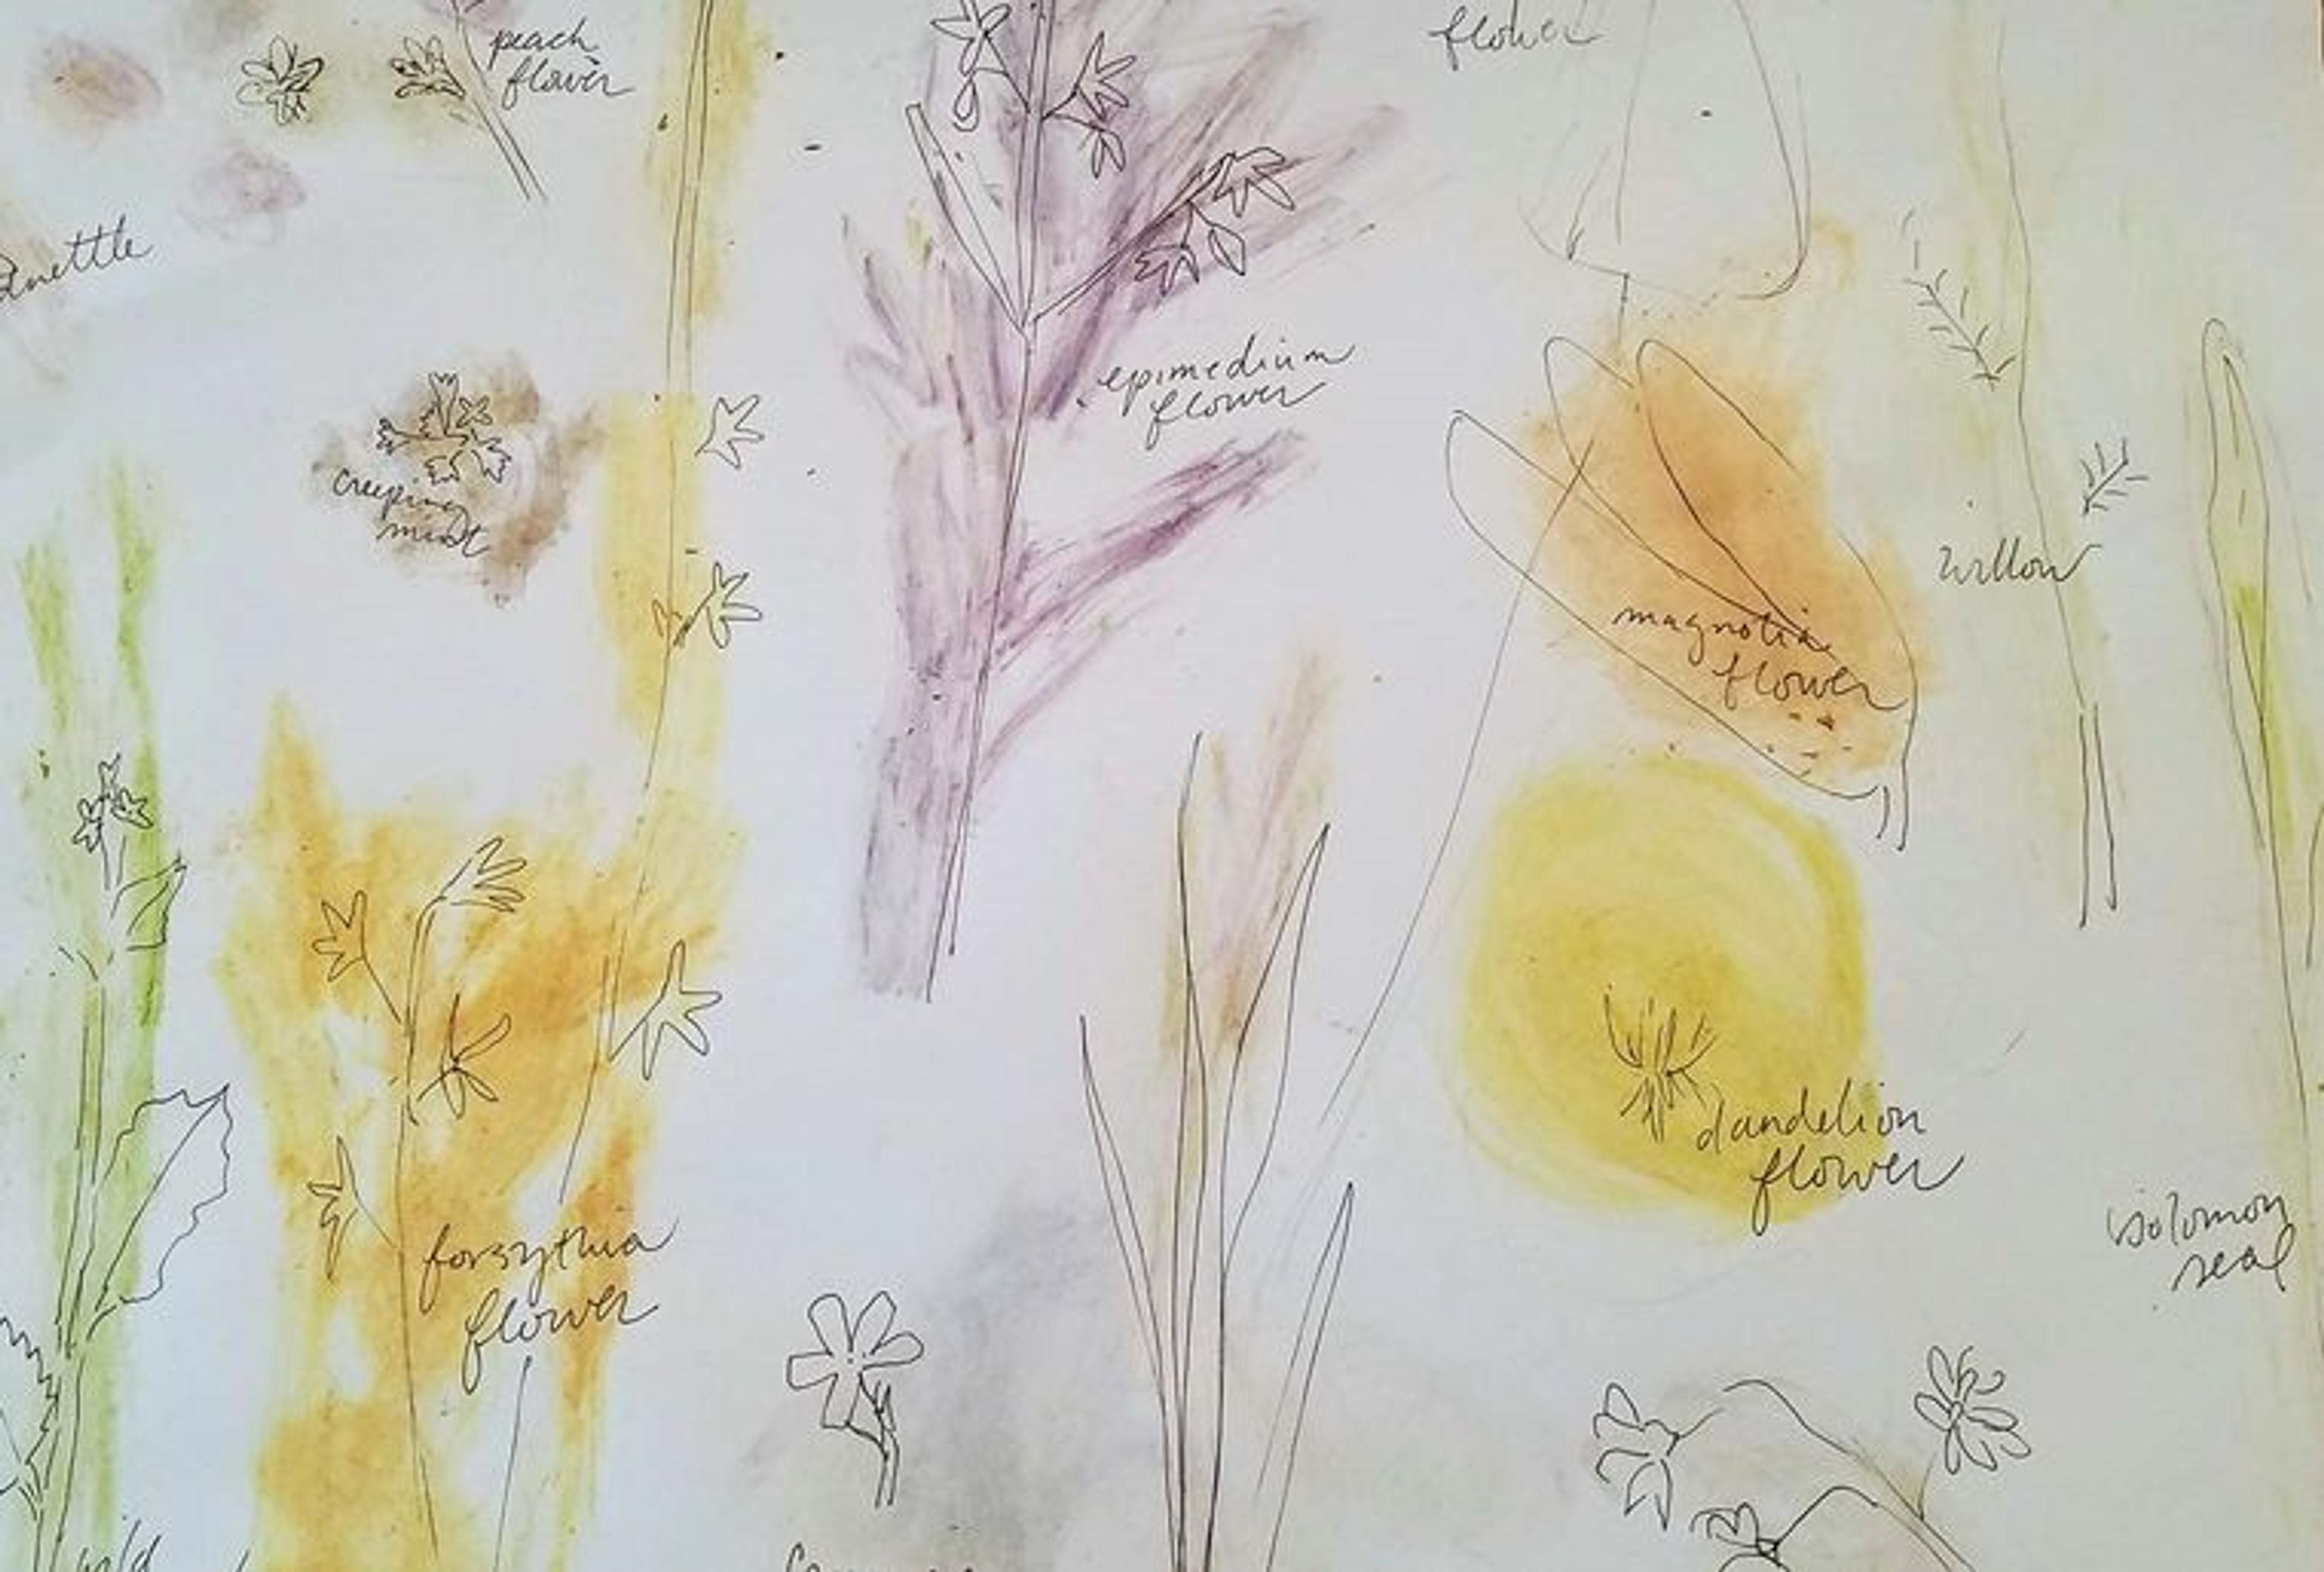 The outline of various plants and herbs sketched onto a white piece of paper, surrounded by stains made from rubbing the plants and handwritten notes about each plant.